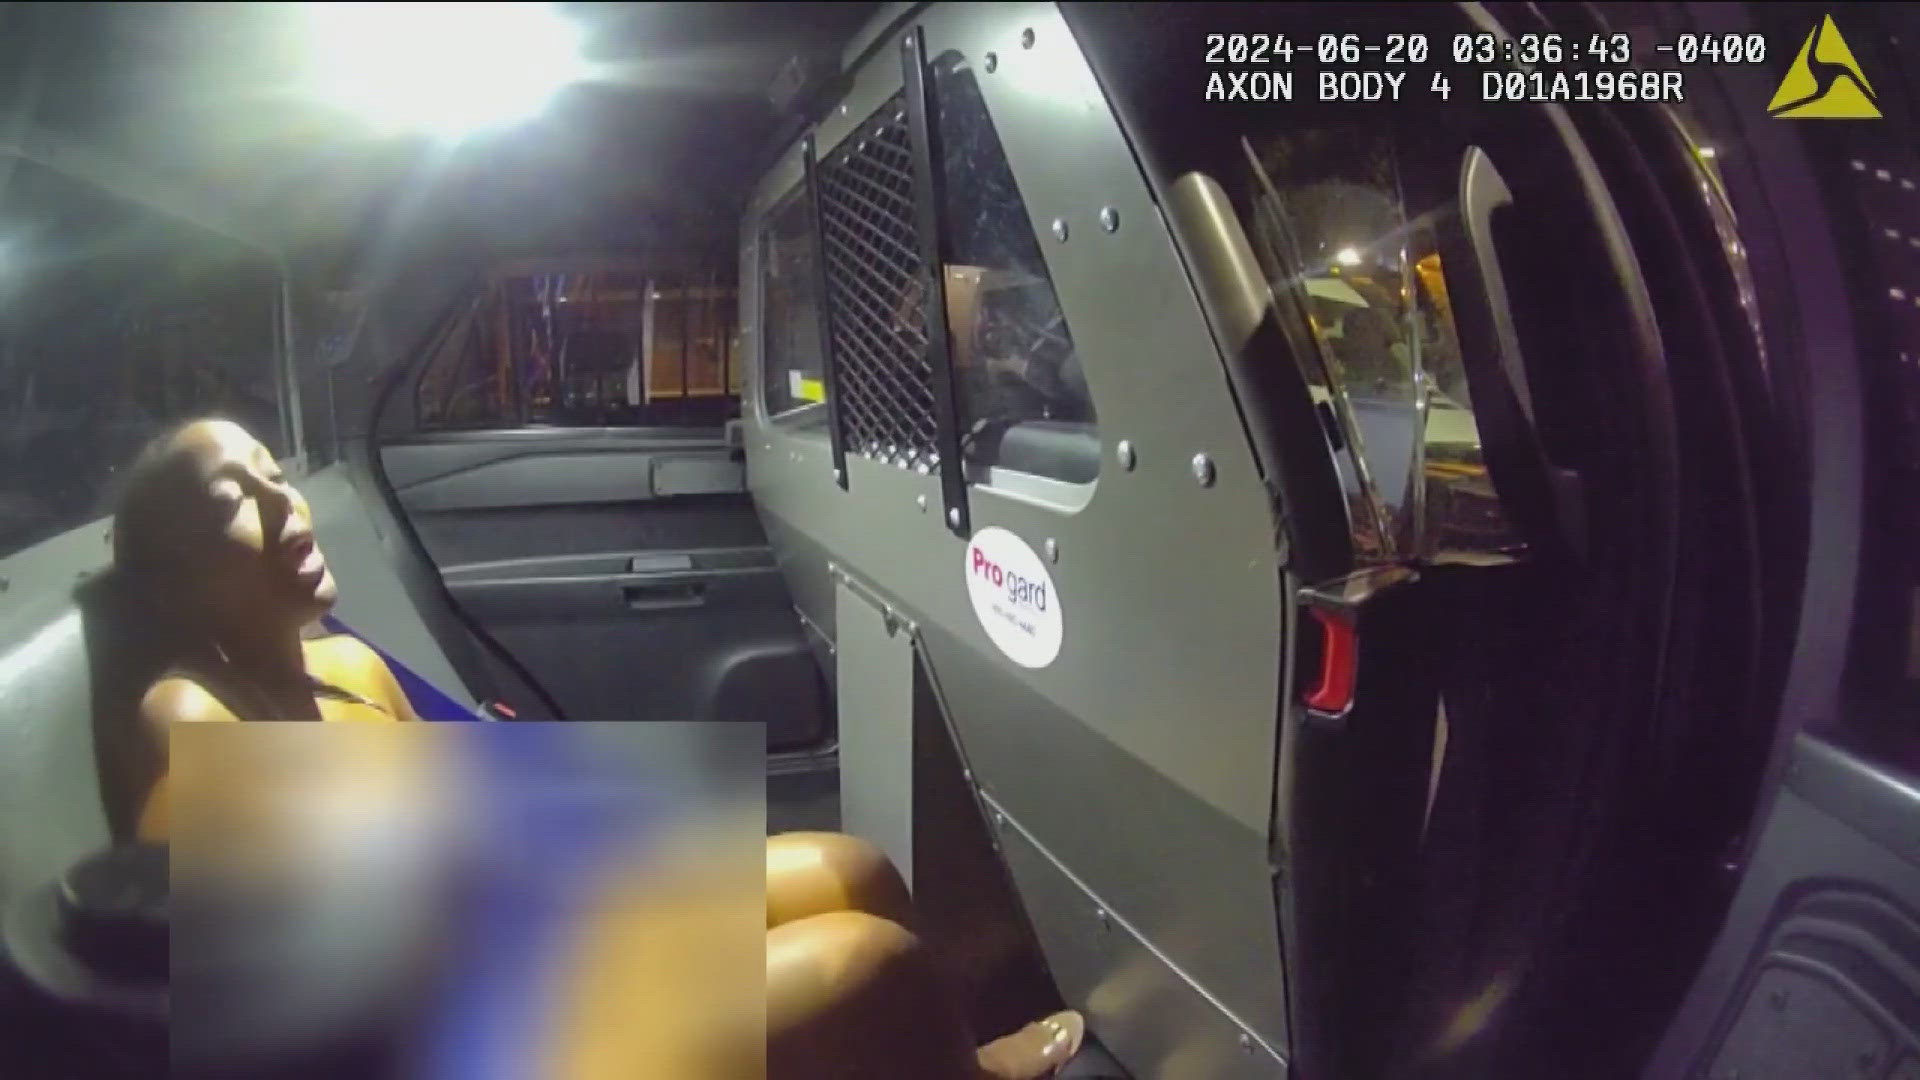 Less than two days after the arrest, the Atlanta Police Department released the body camera footage of Douglas County probate Judge Christina Peterson being arrested